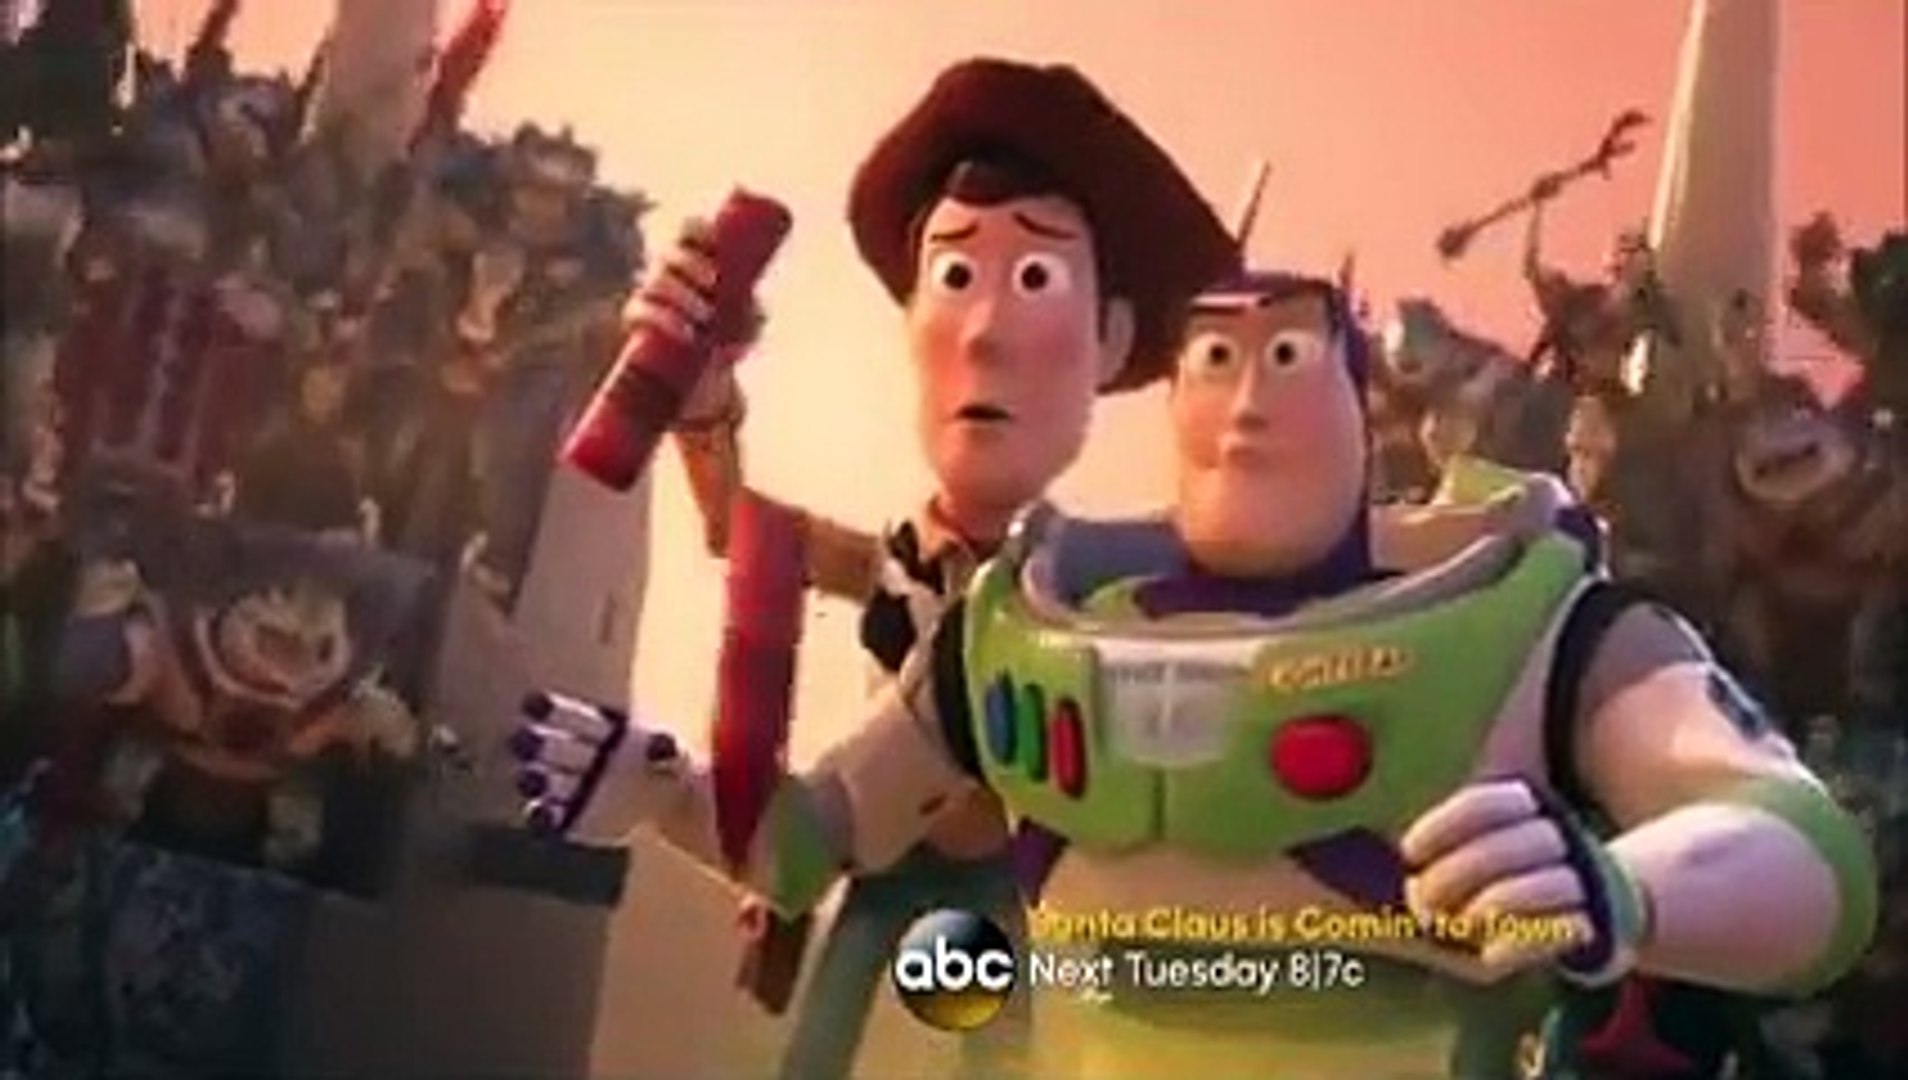 toy story that time forgot trailer